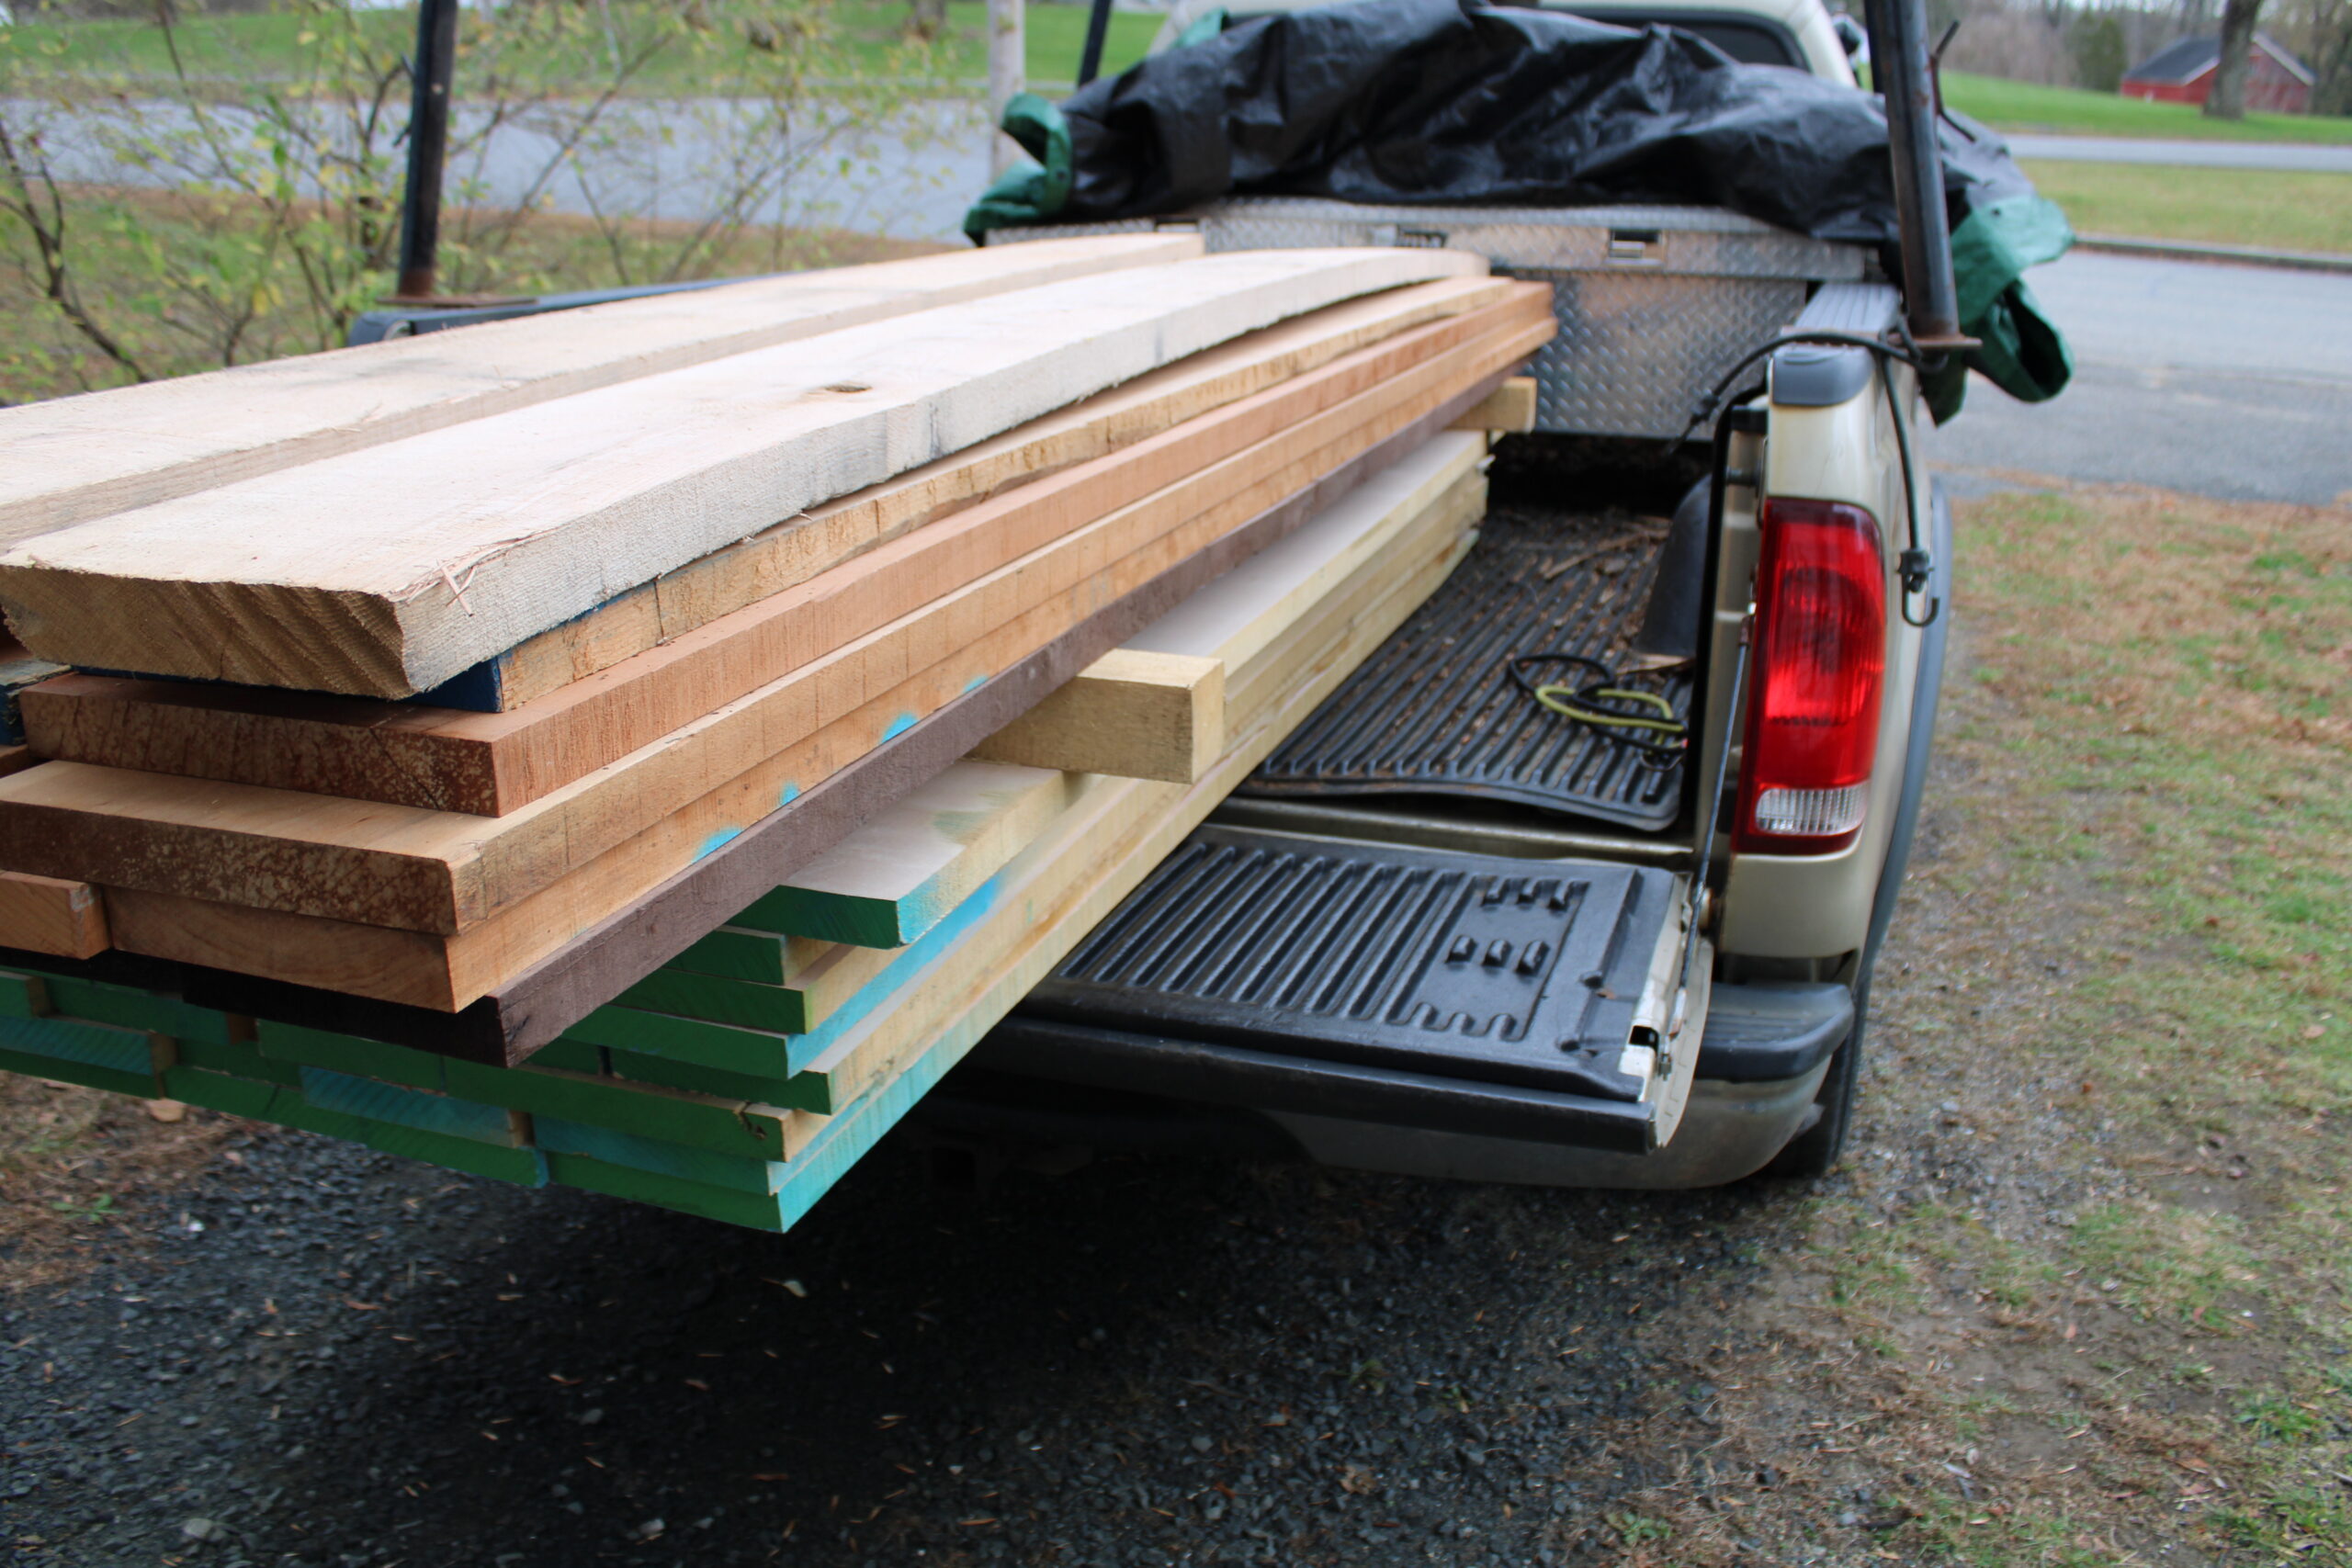 New Load of wood: Maple, Walnut, and Cherry.